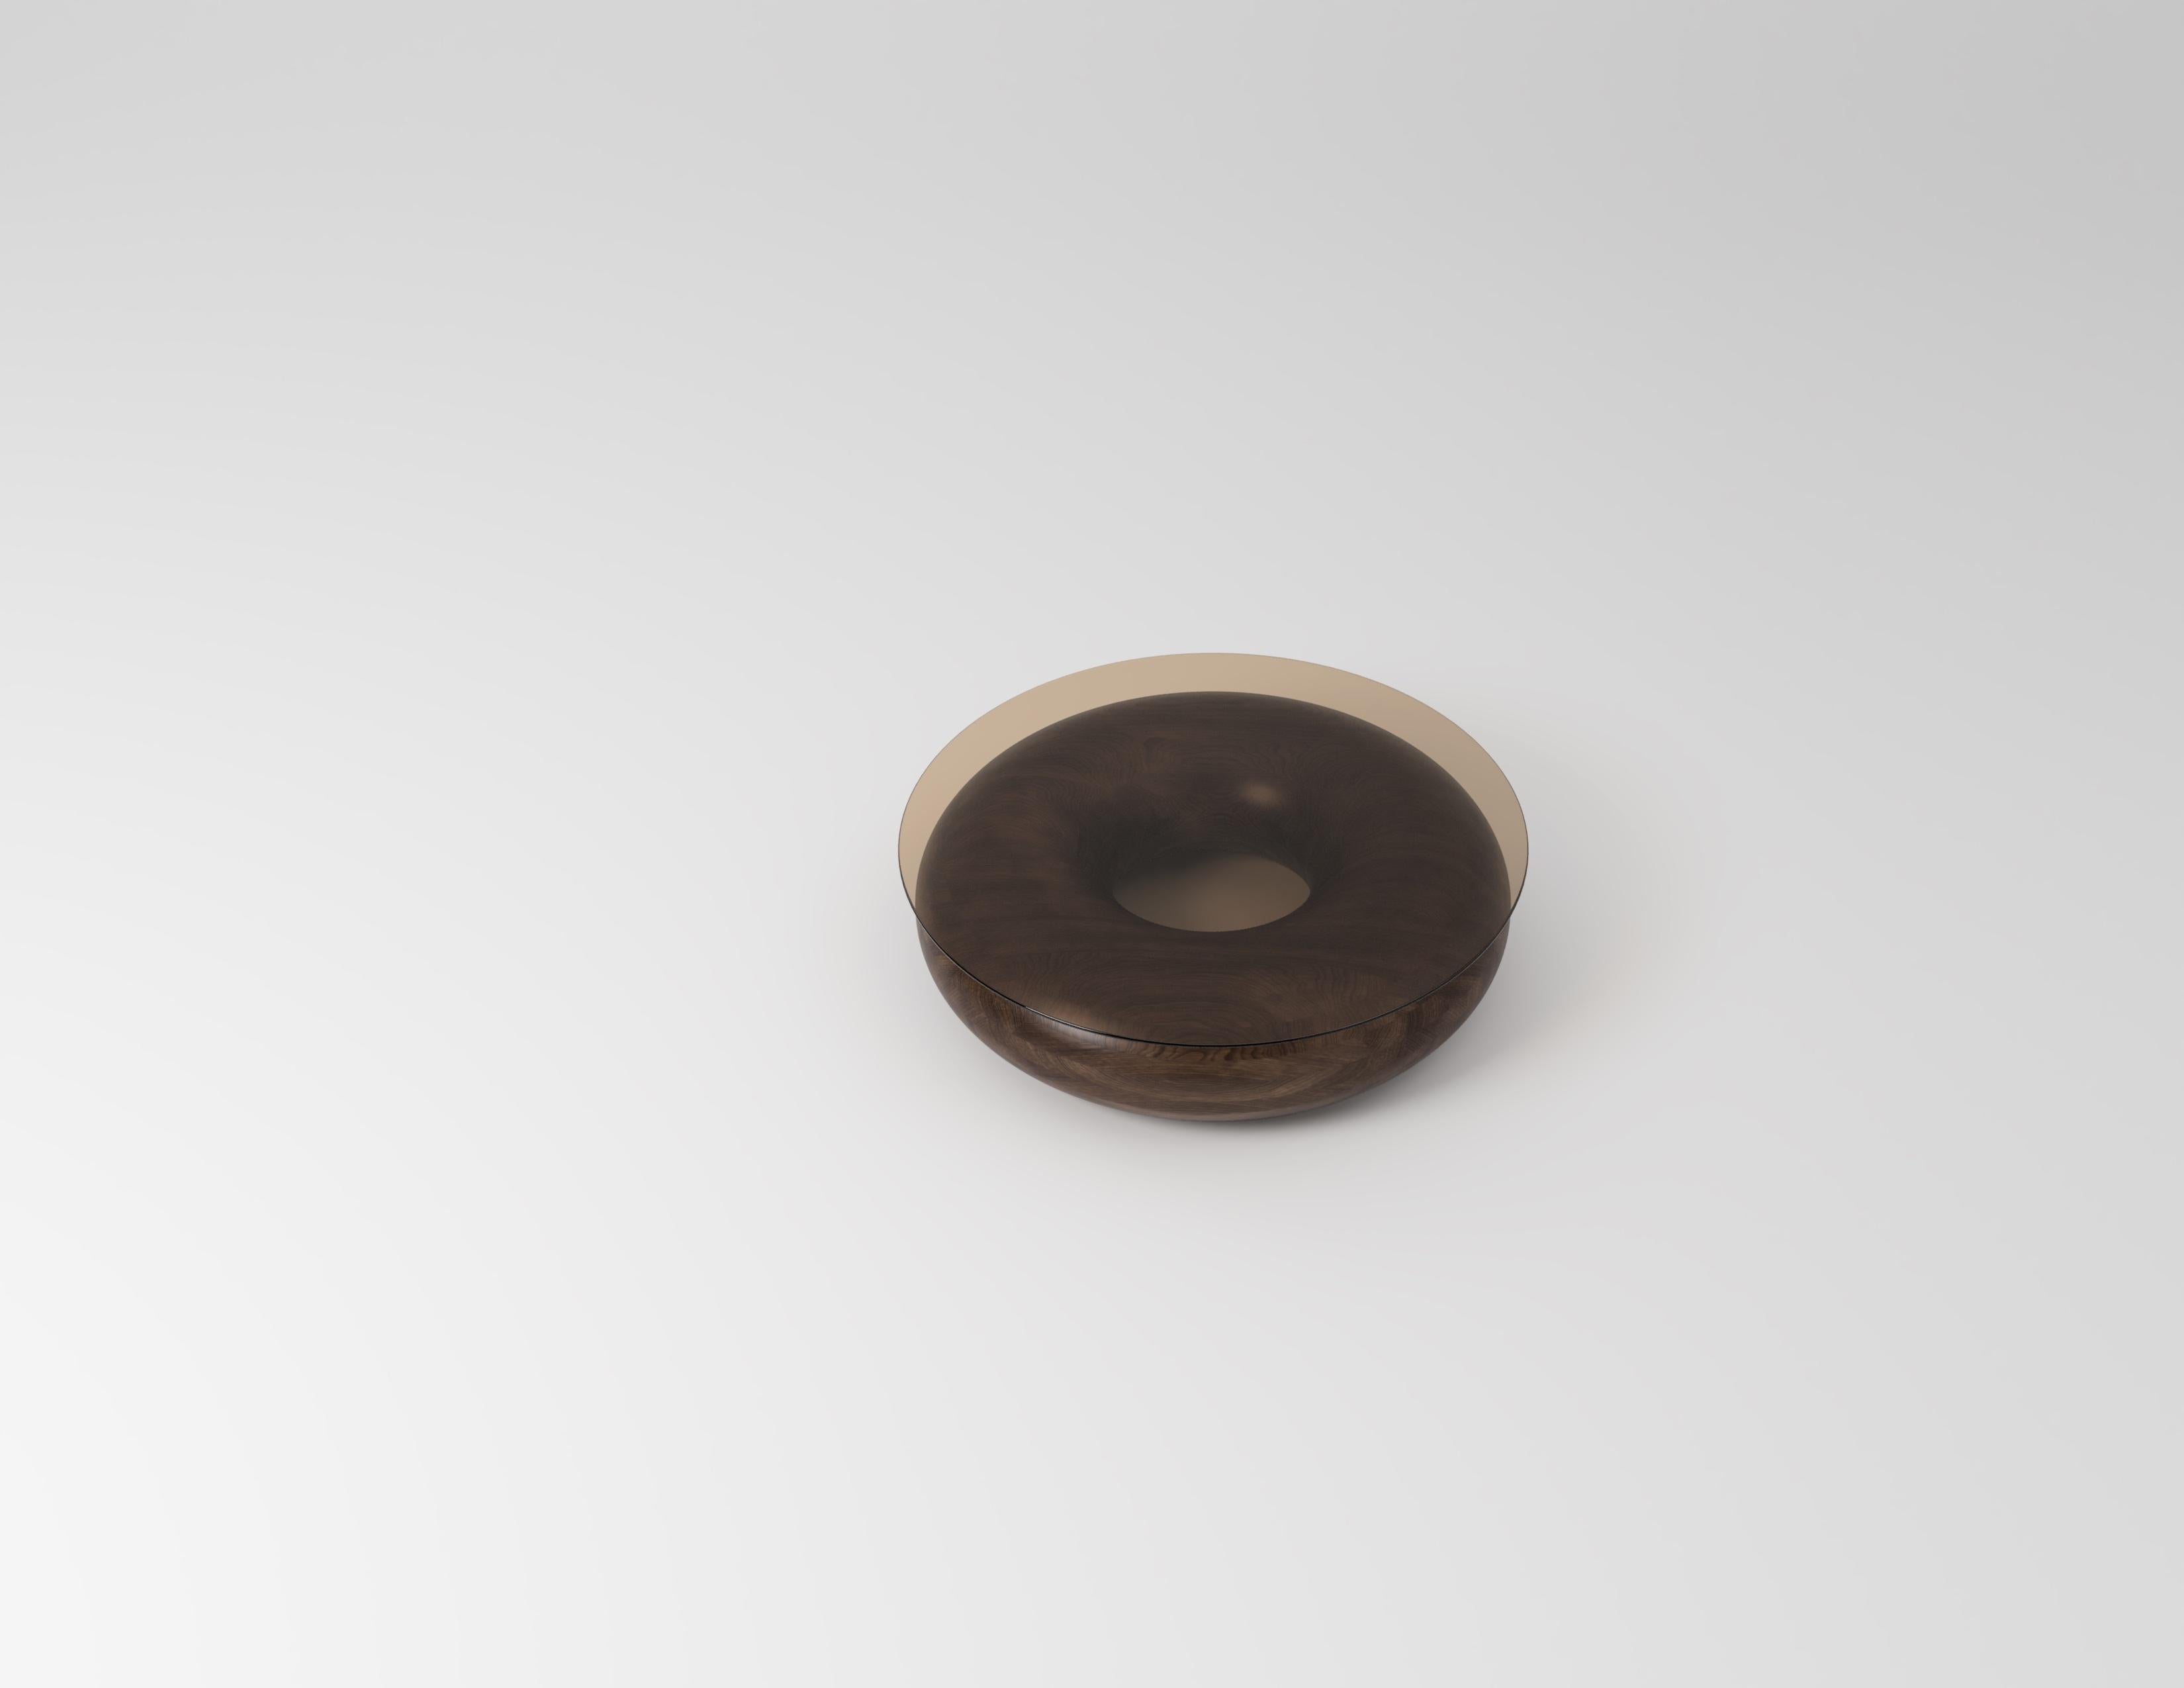 Made-to-order
Doughnut walnut with bronze glass top
Coffee table by Johan Wilén

A true testament to the designer’s signature style, redefining what we understand as the beauty of simplicity. Exquisite solid wood base with bronze glass top,